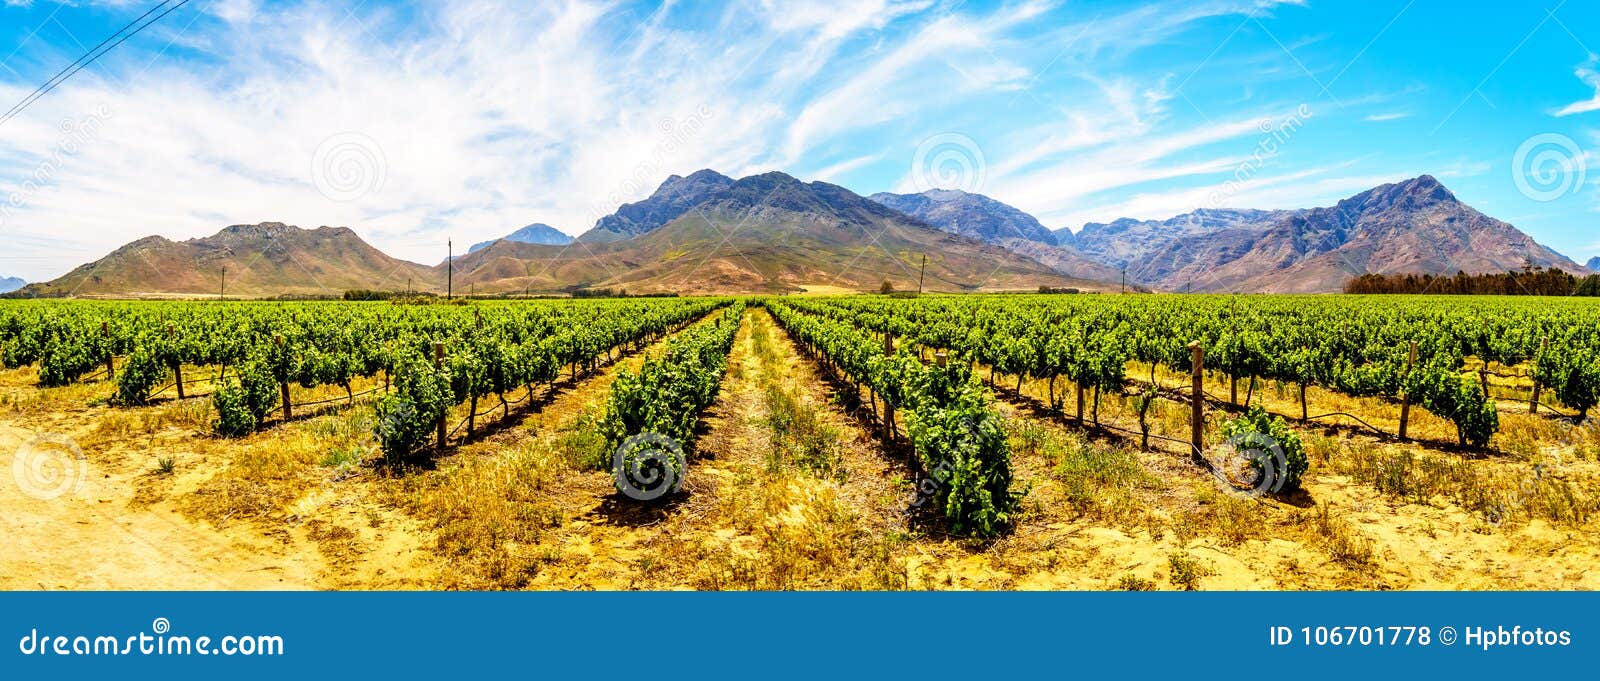 panorama of vineyards and surrounding mountains in spring in the boland wine region of the western cape